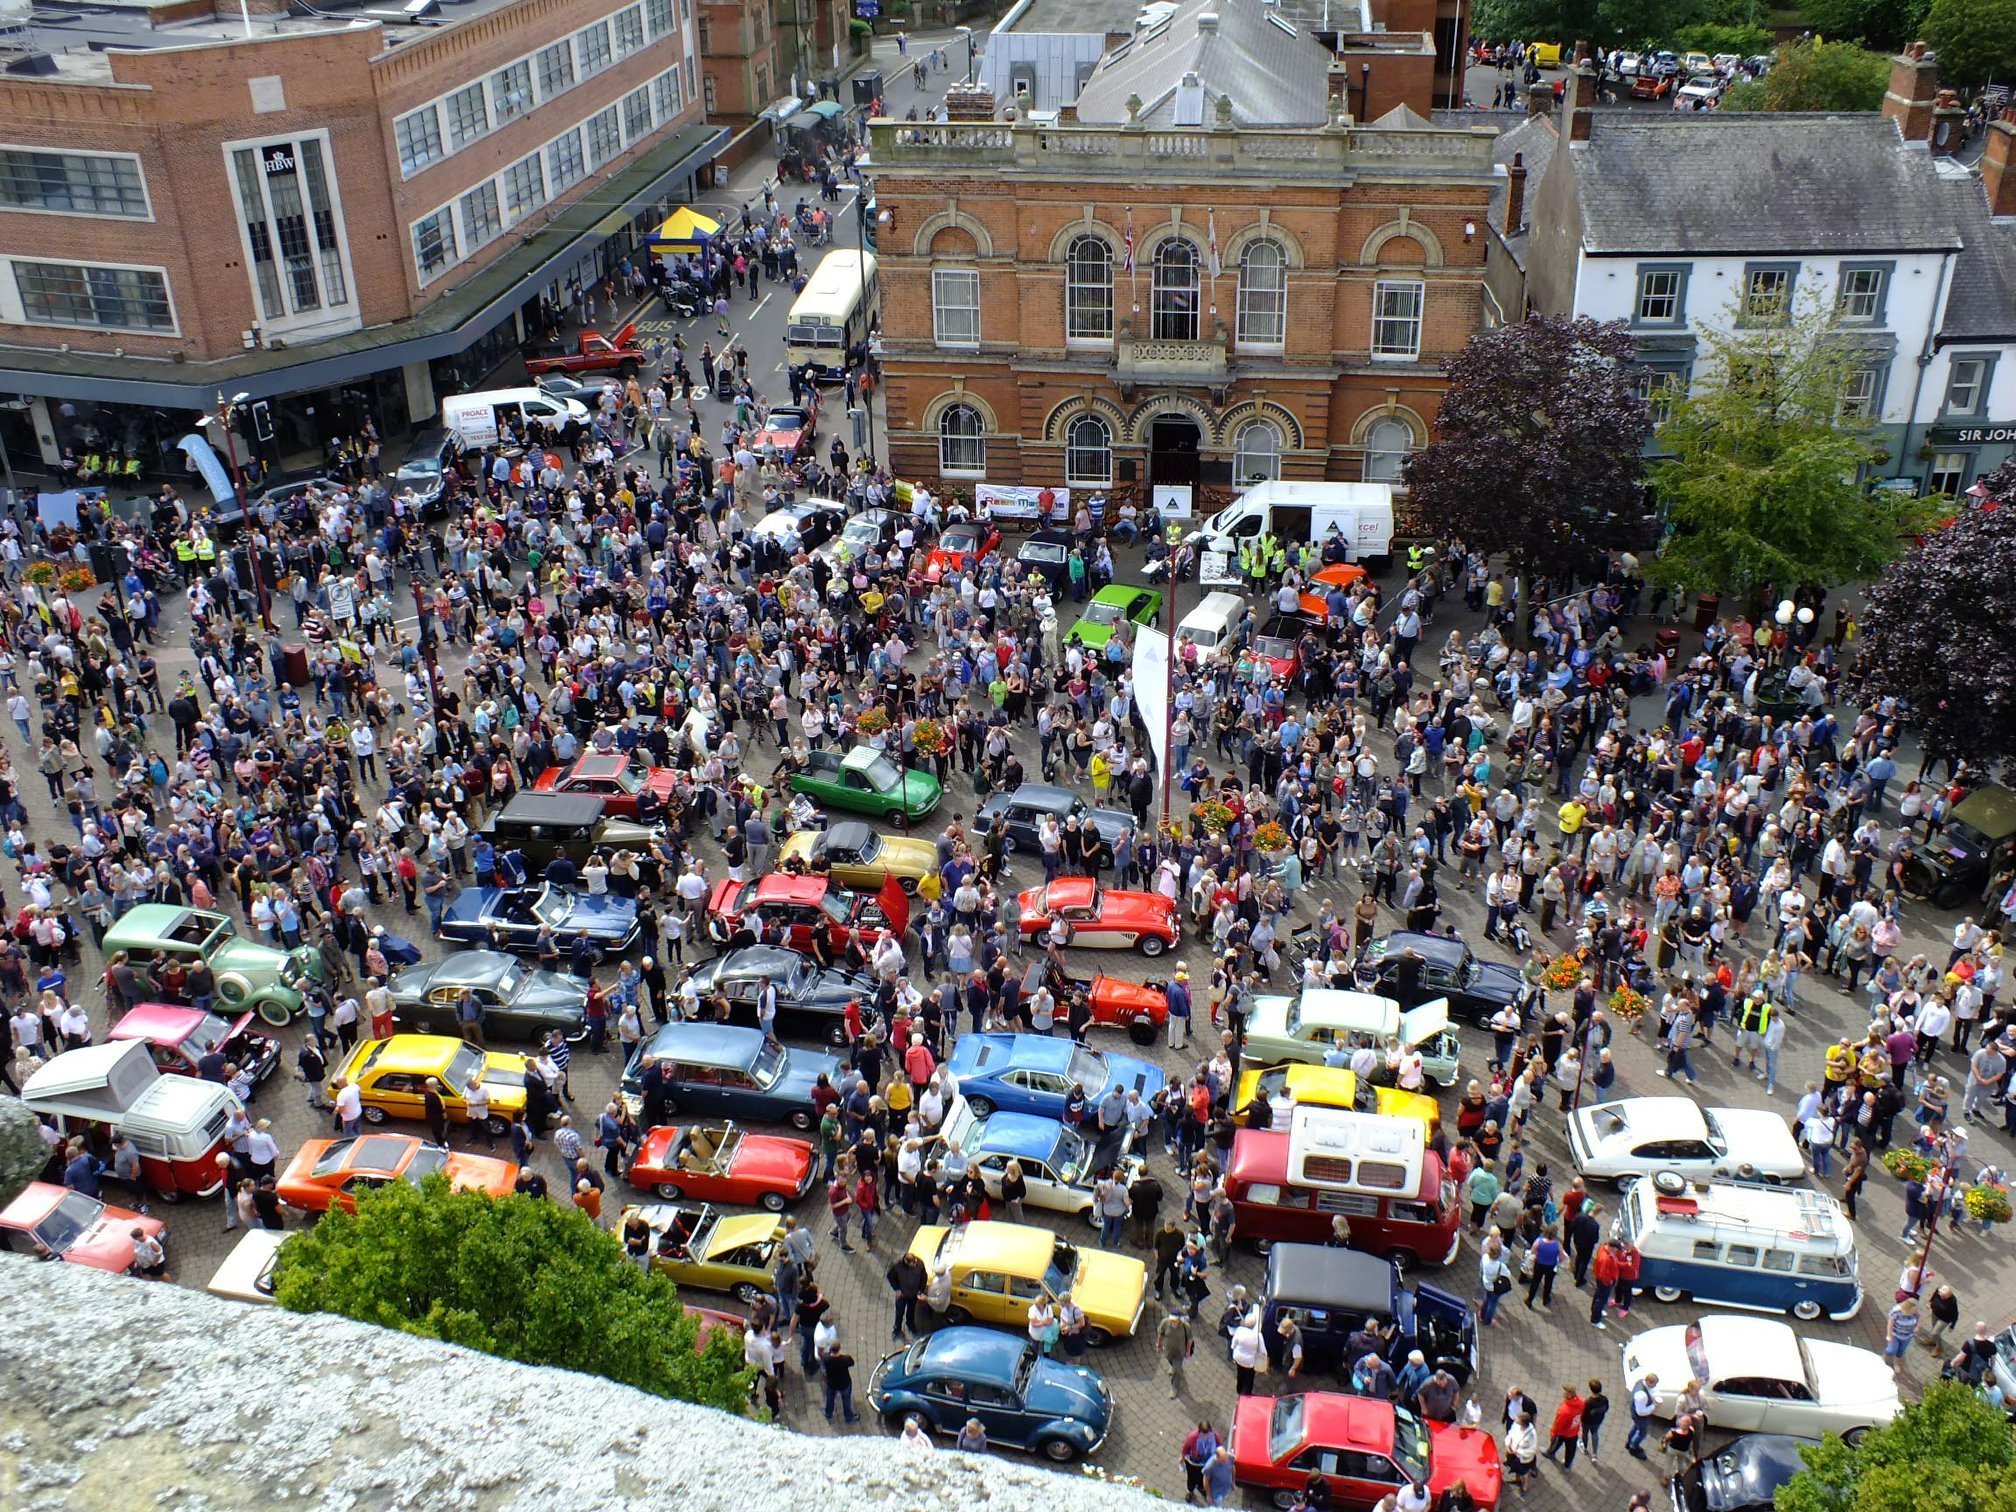 Only two days away Ilkeston Heritage and Classic Vehicle Show